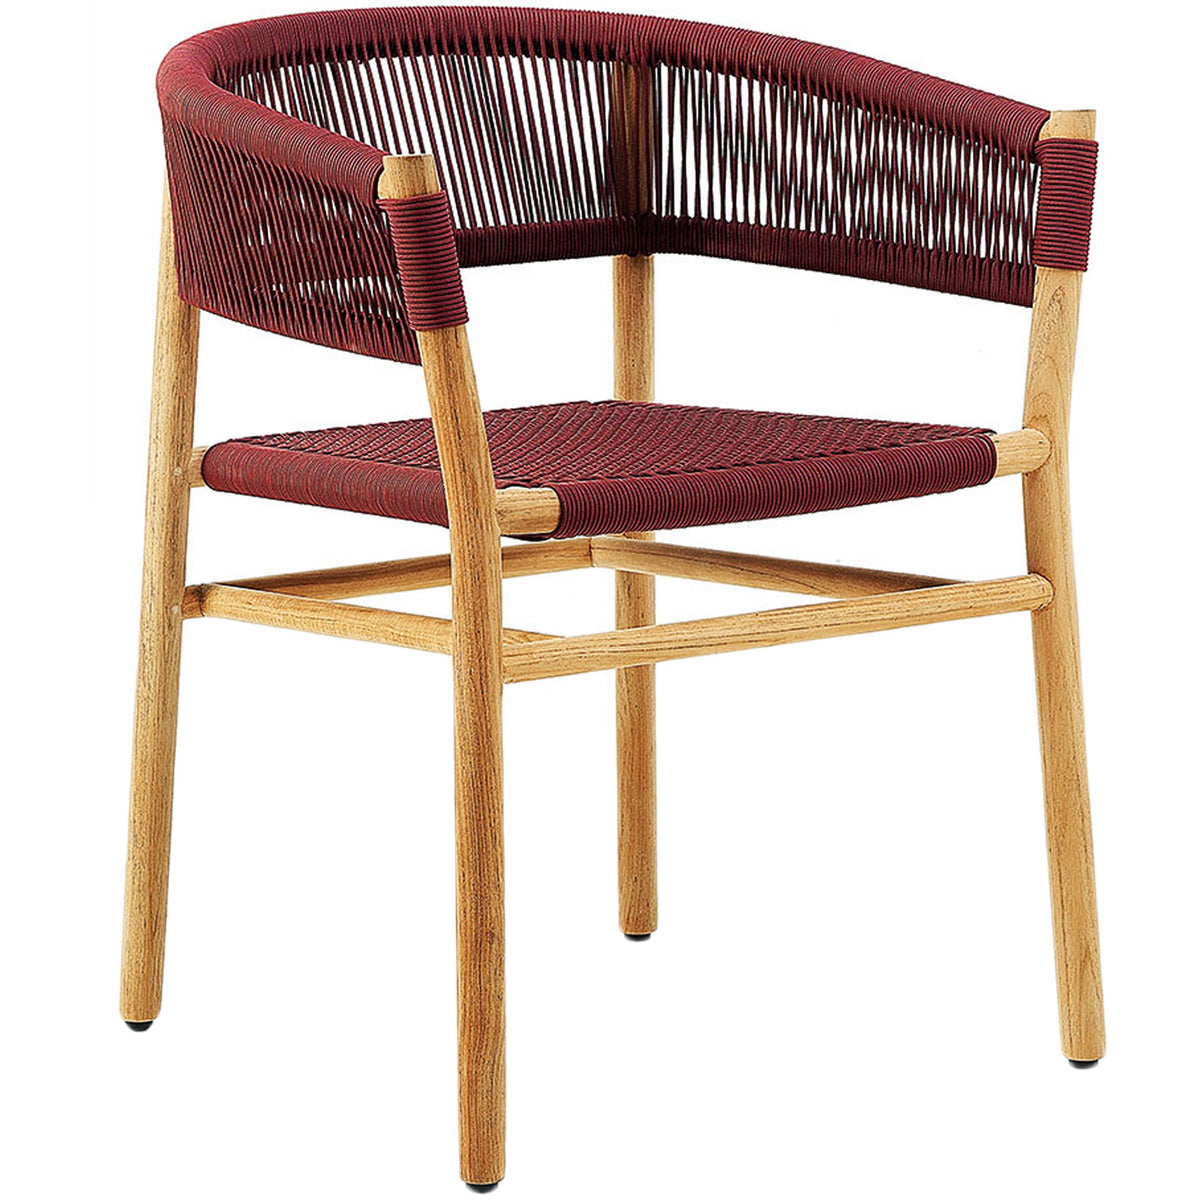 Kilt Set of 4 Outdoor Dining Chairs